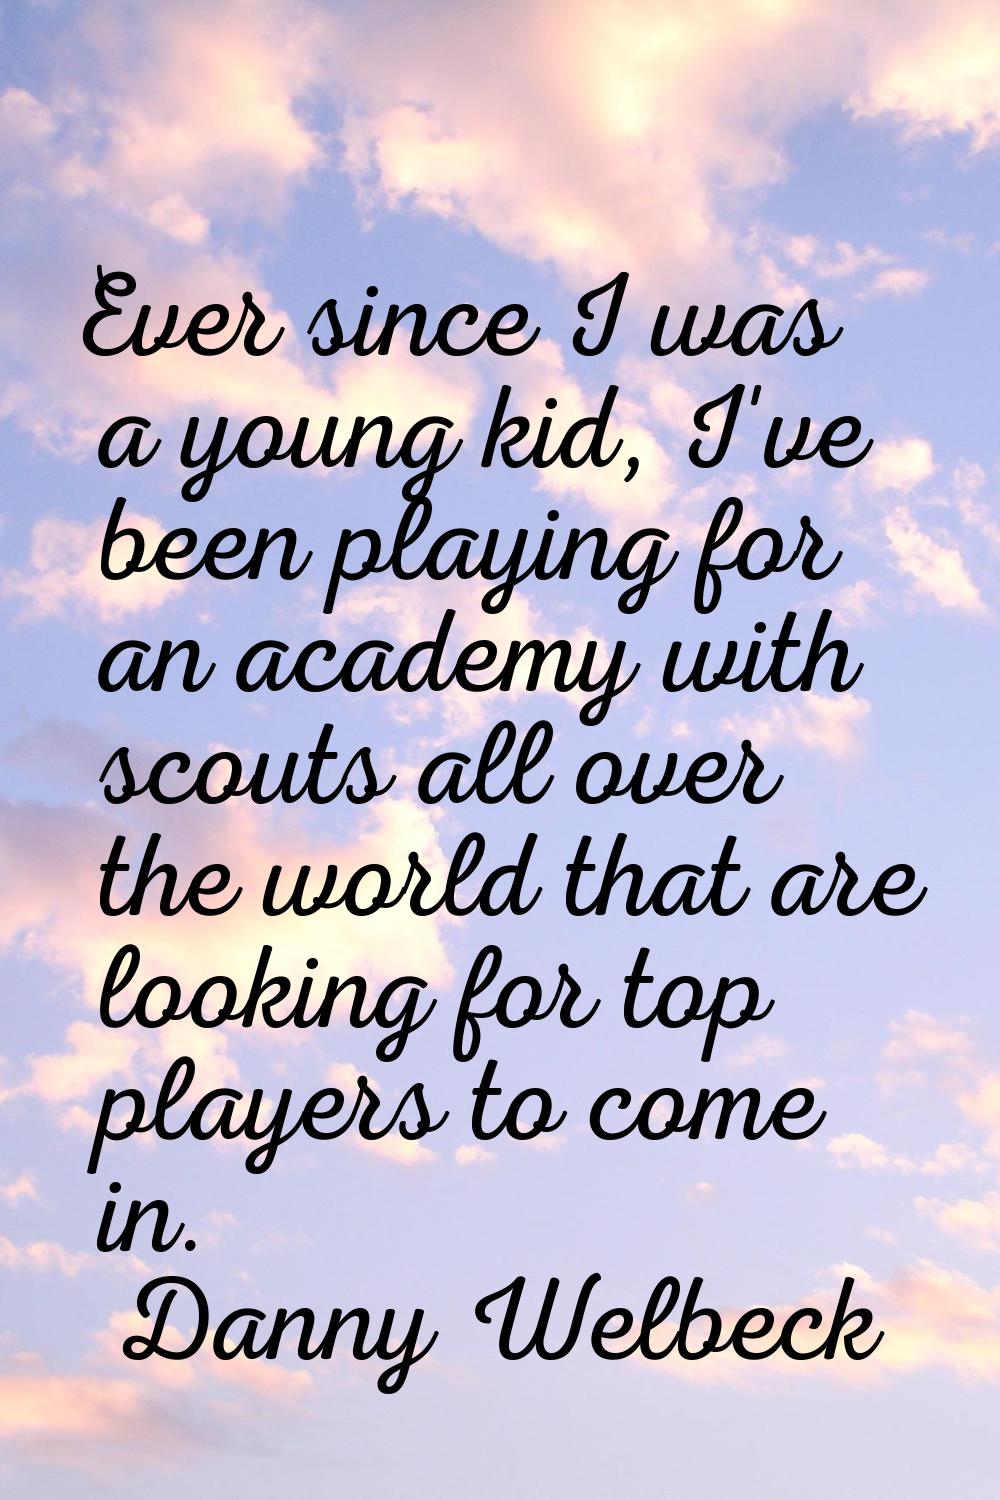 Ever since I was a young kid, I've been playing for an academy with scouts all over the world that 